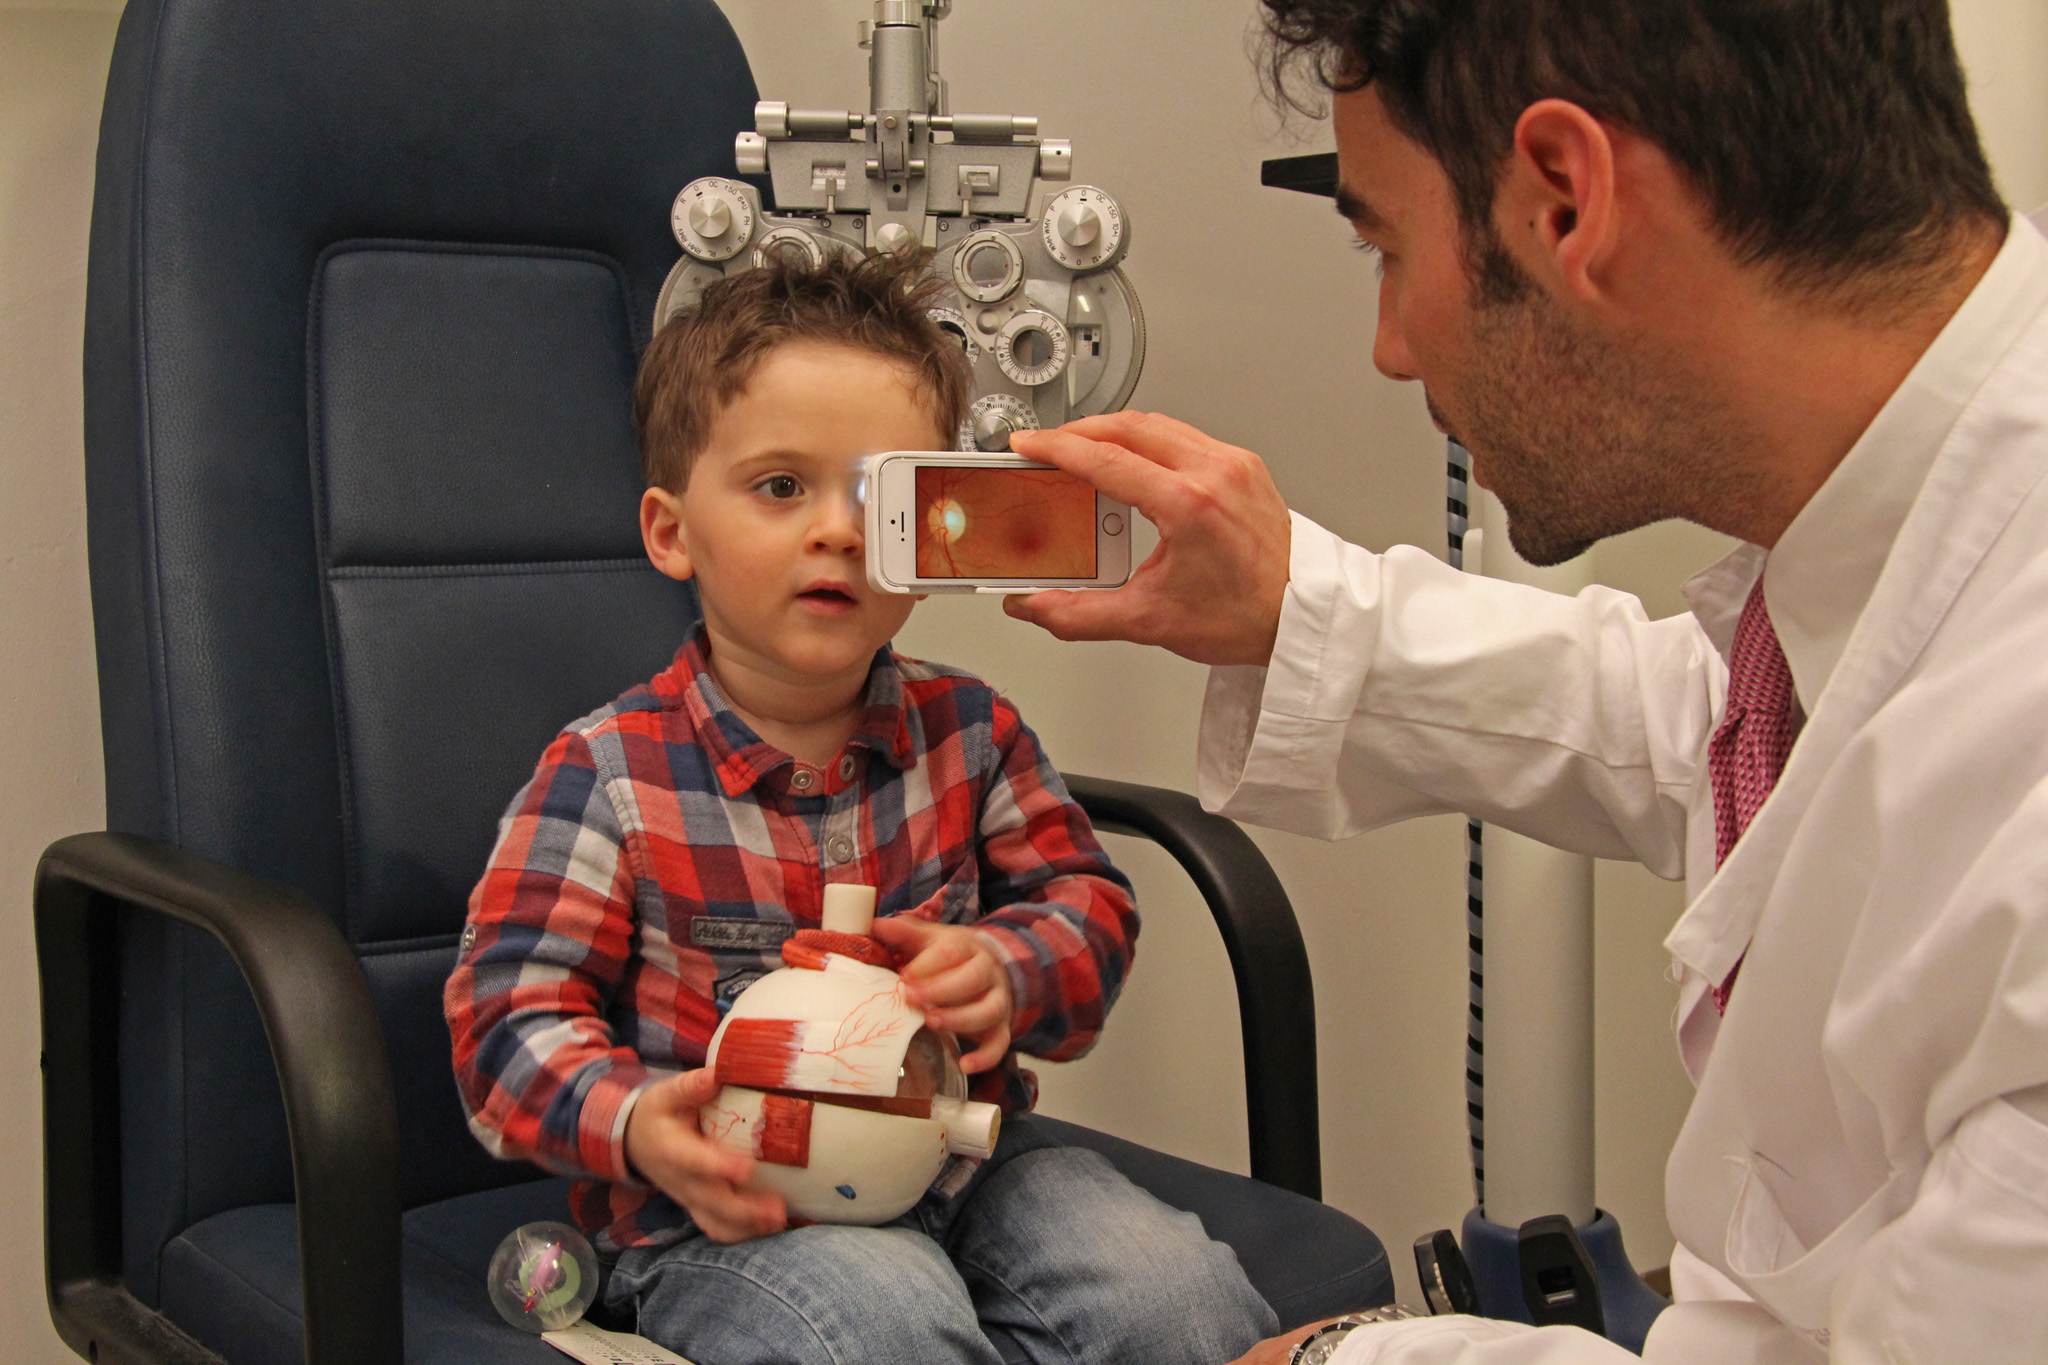 The D-EYE system facilitates exams with even young patients